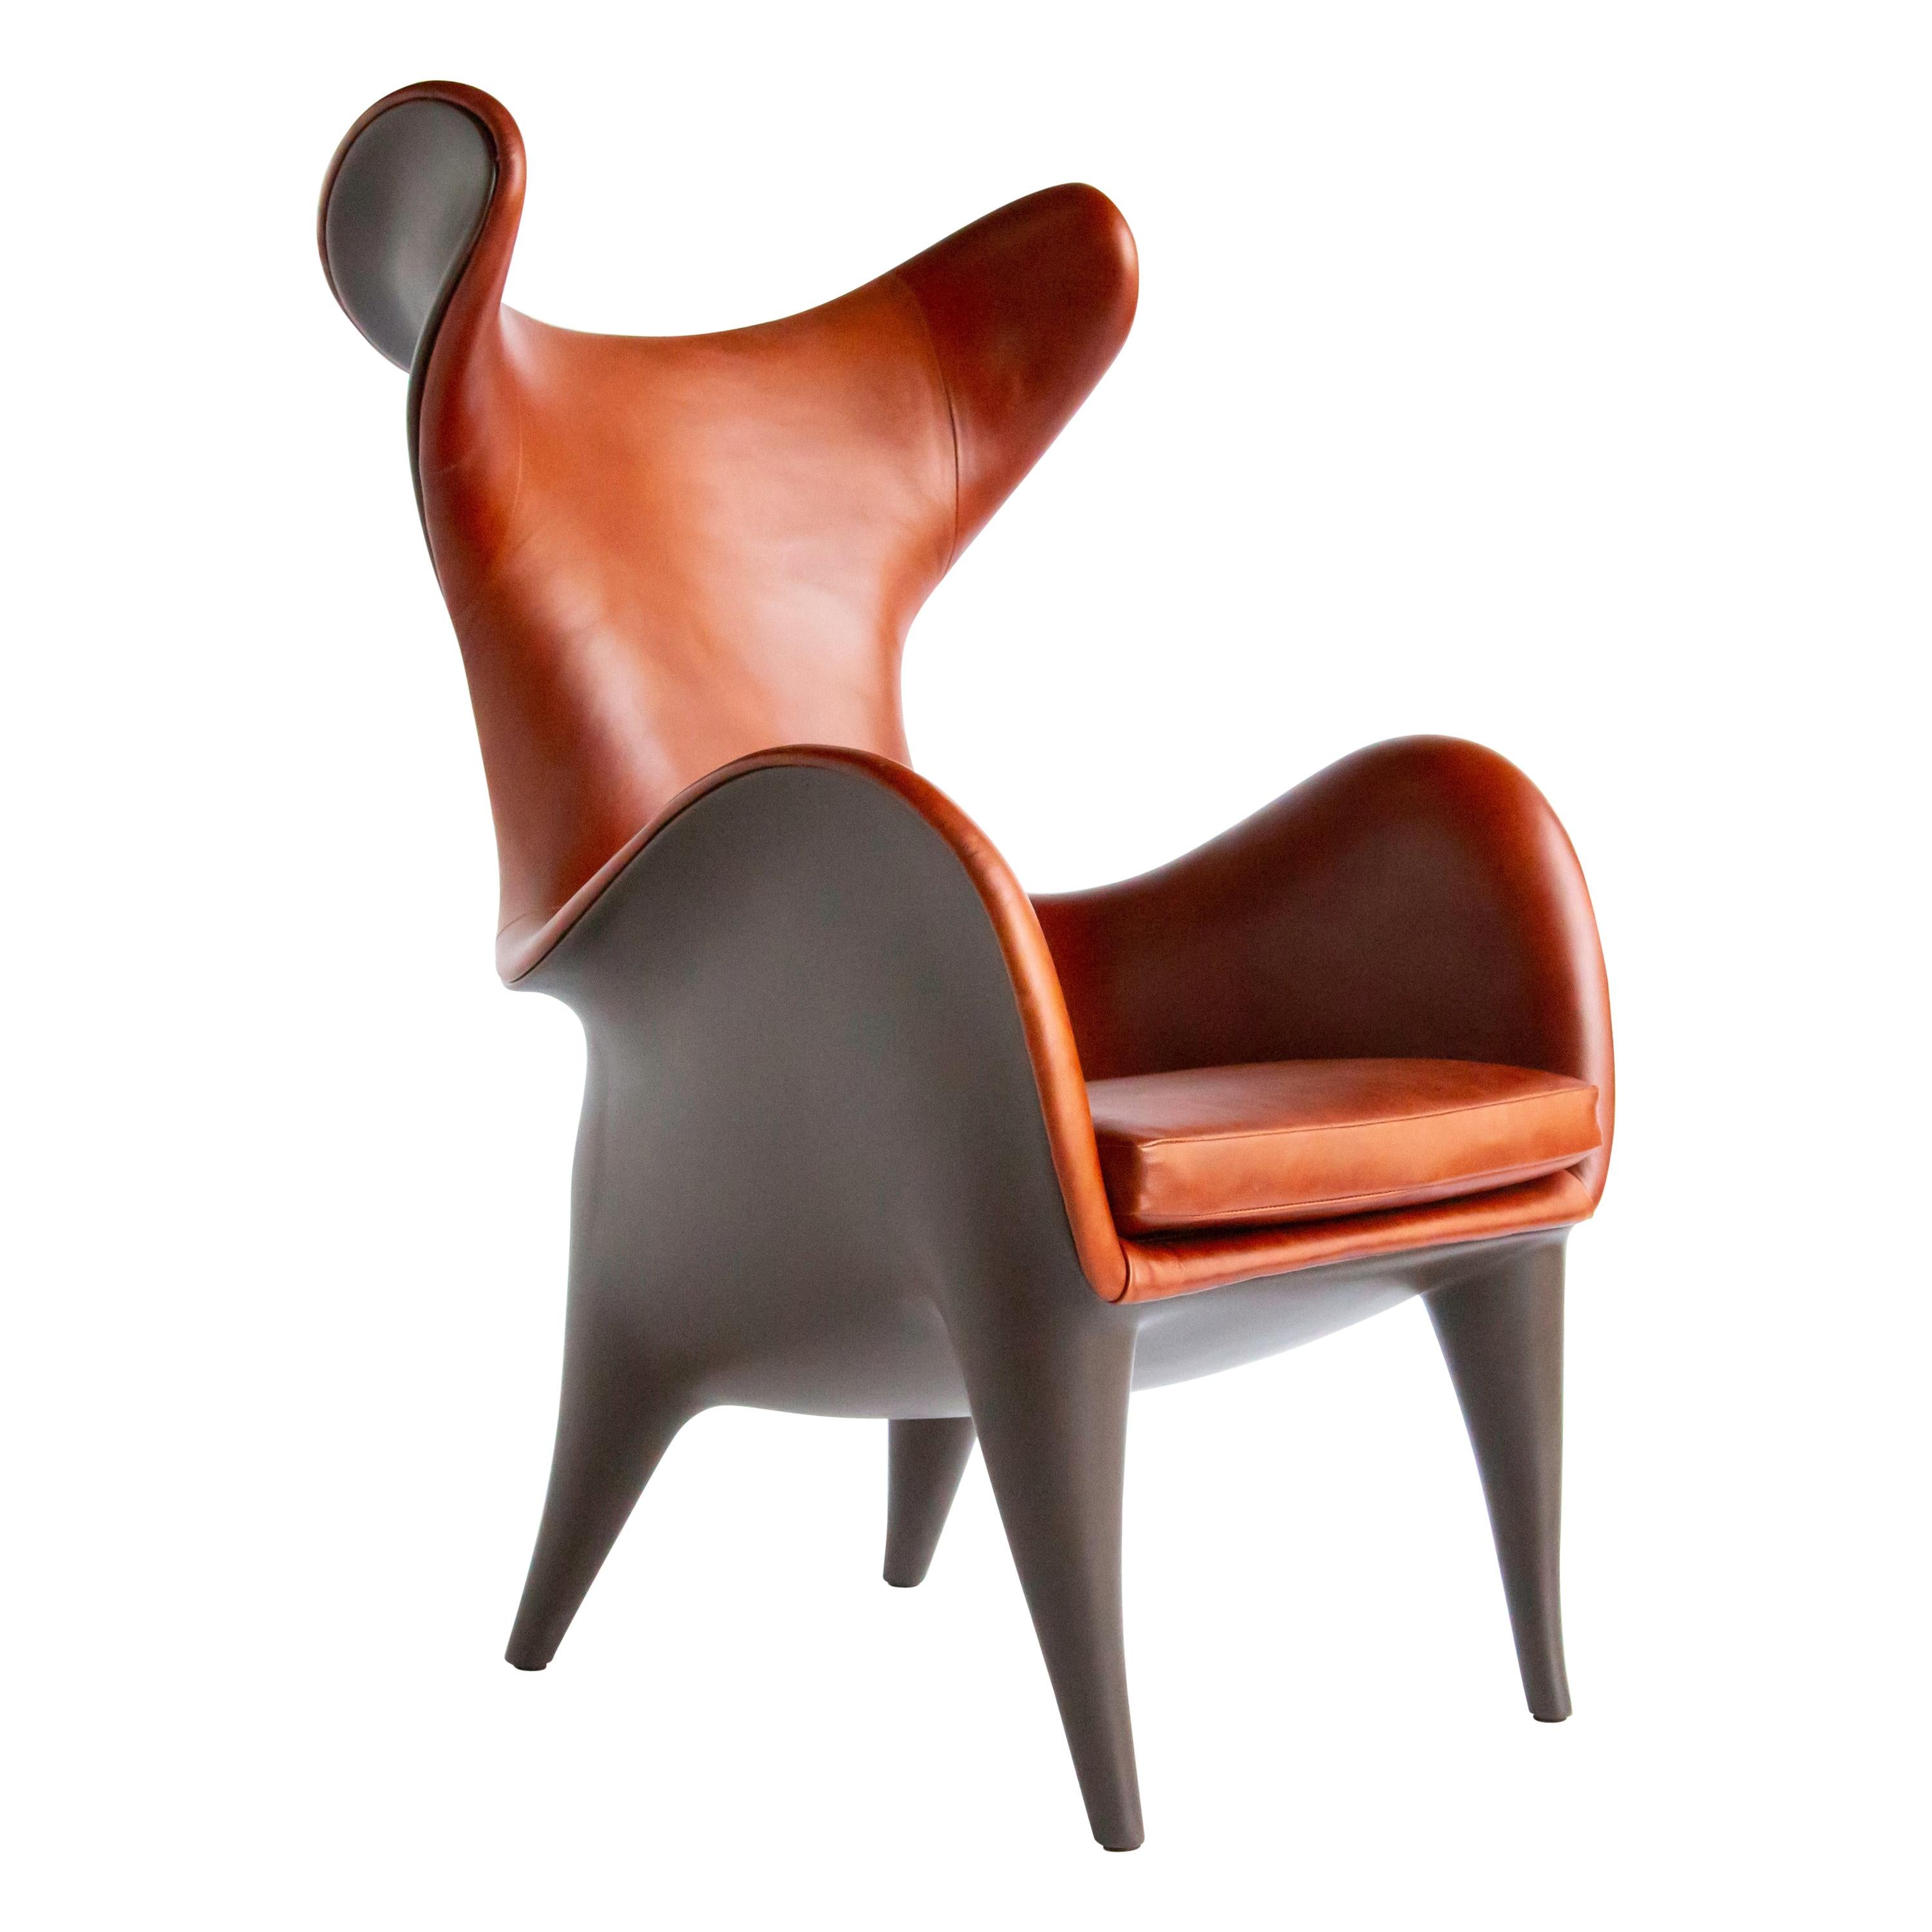 Frankie Wingback Chair/ Lounge Chair, Leather & Resin, Jordan Mozer, USA, 2018 For Sale